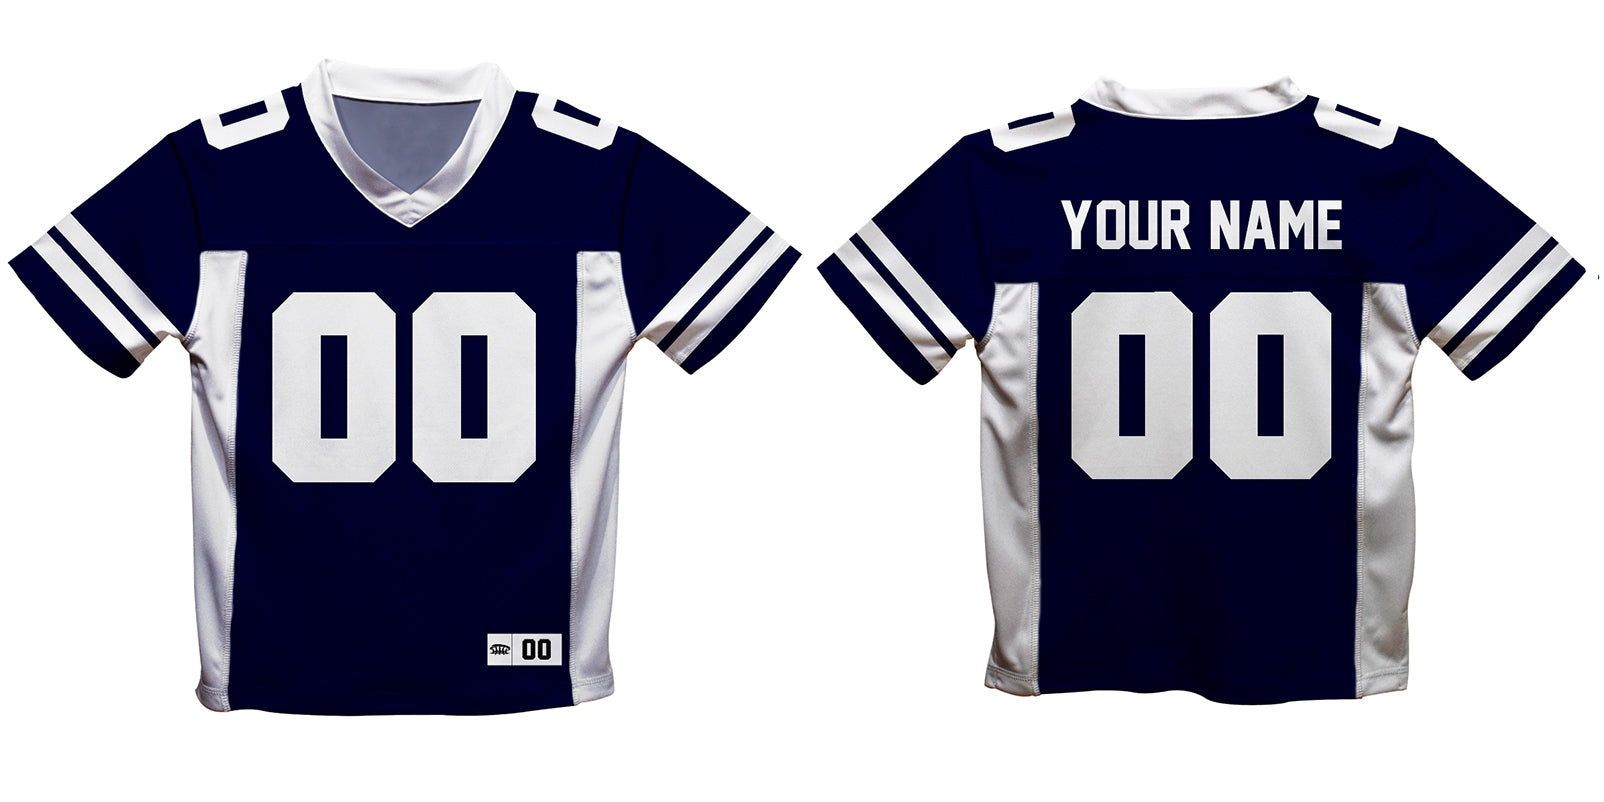 Personalized Name and Number Purple and White Fashion Football T-Shirt - Wimziy&Co.